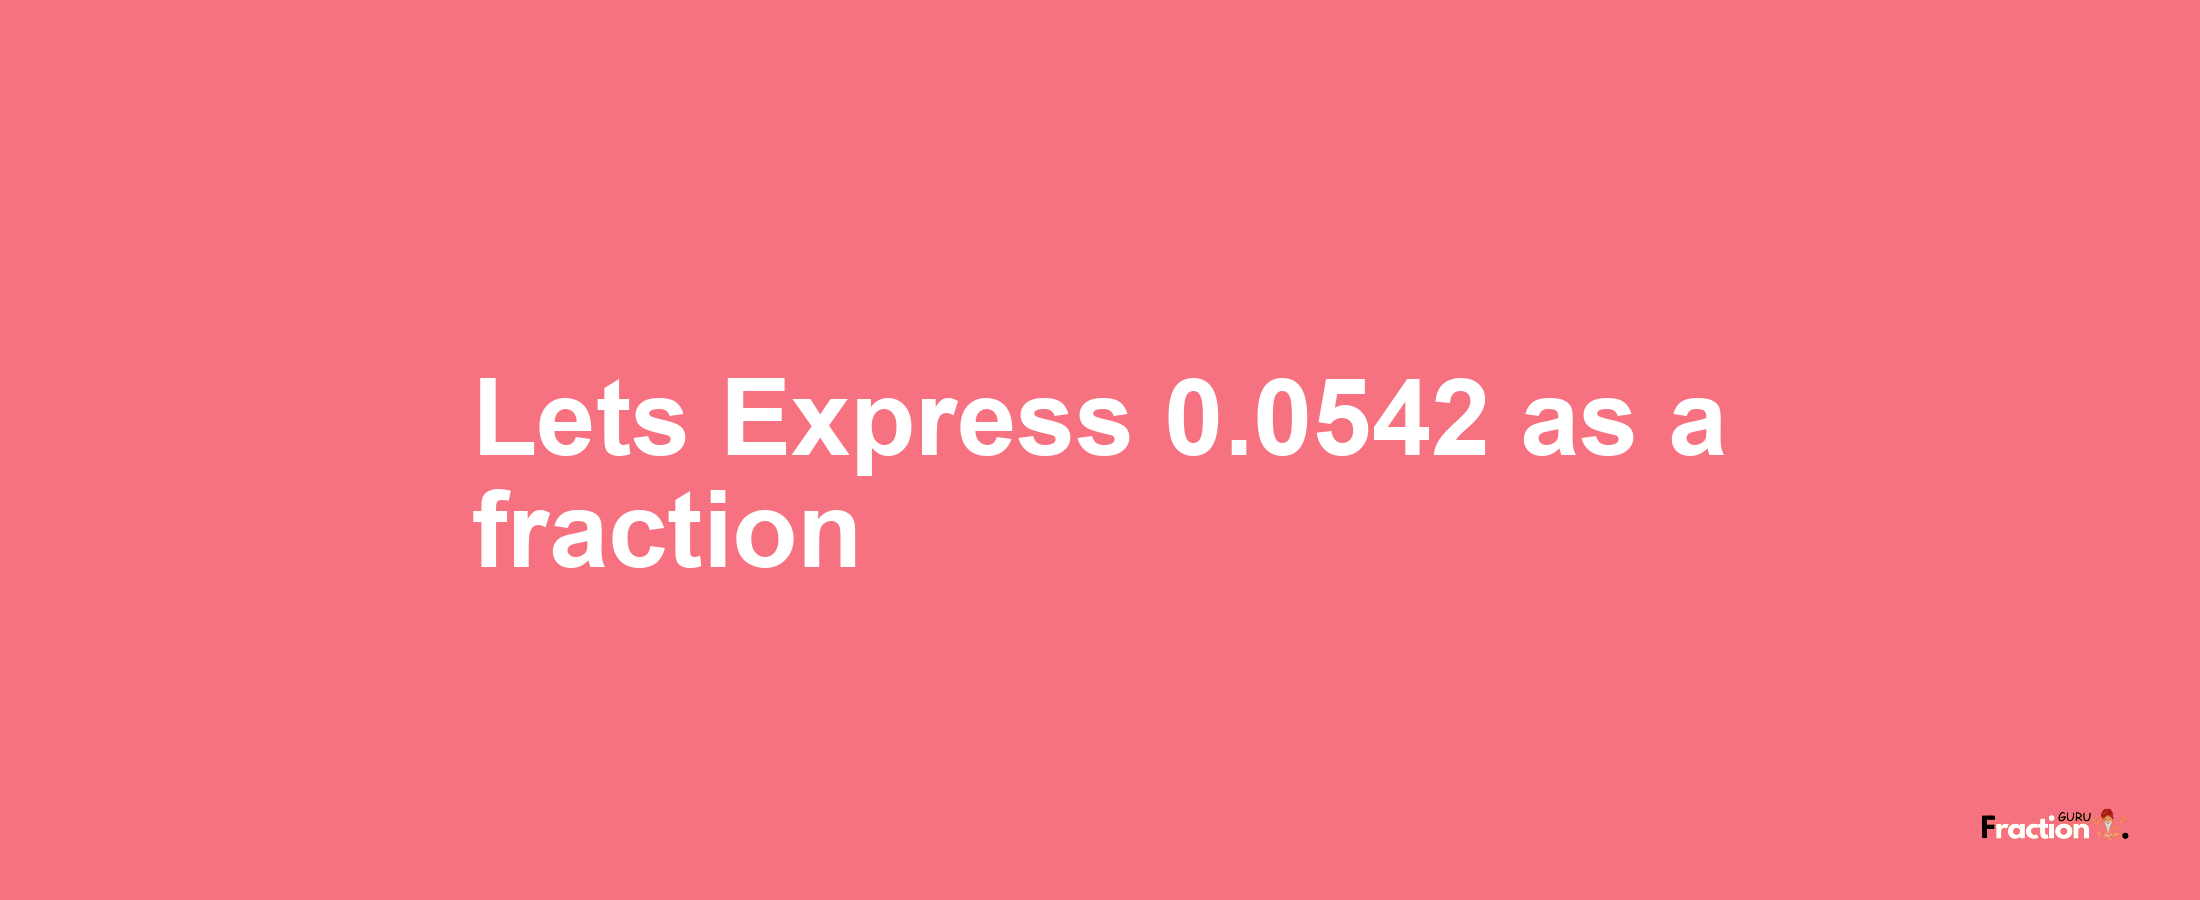 Lets Express 0.0542 as afraction